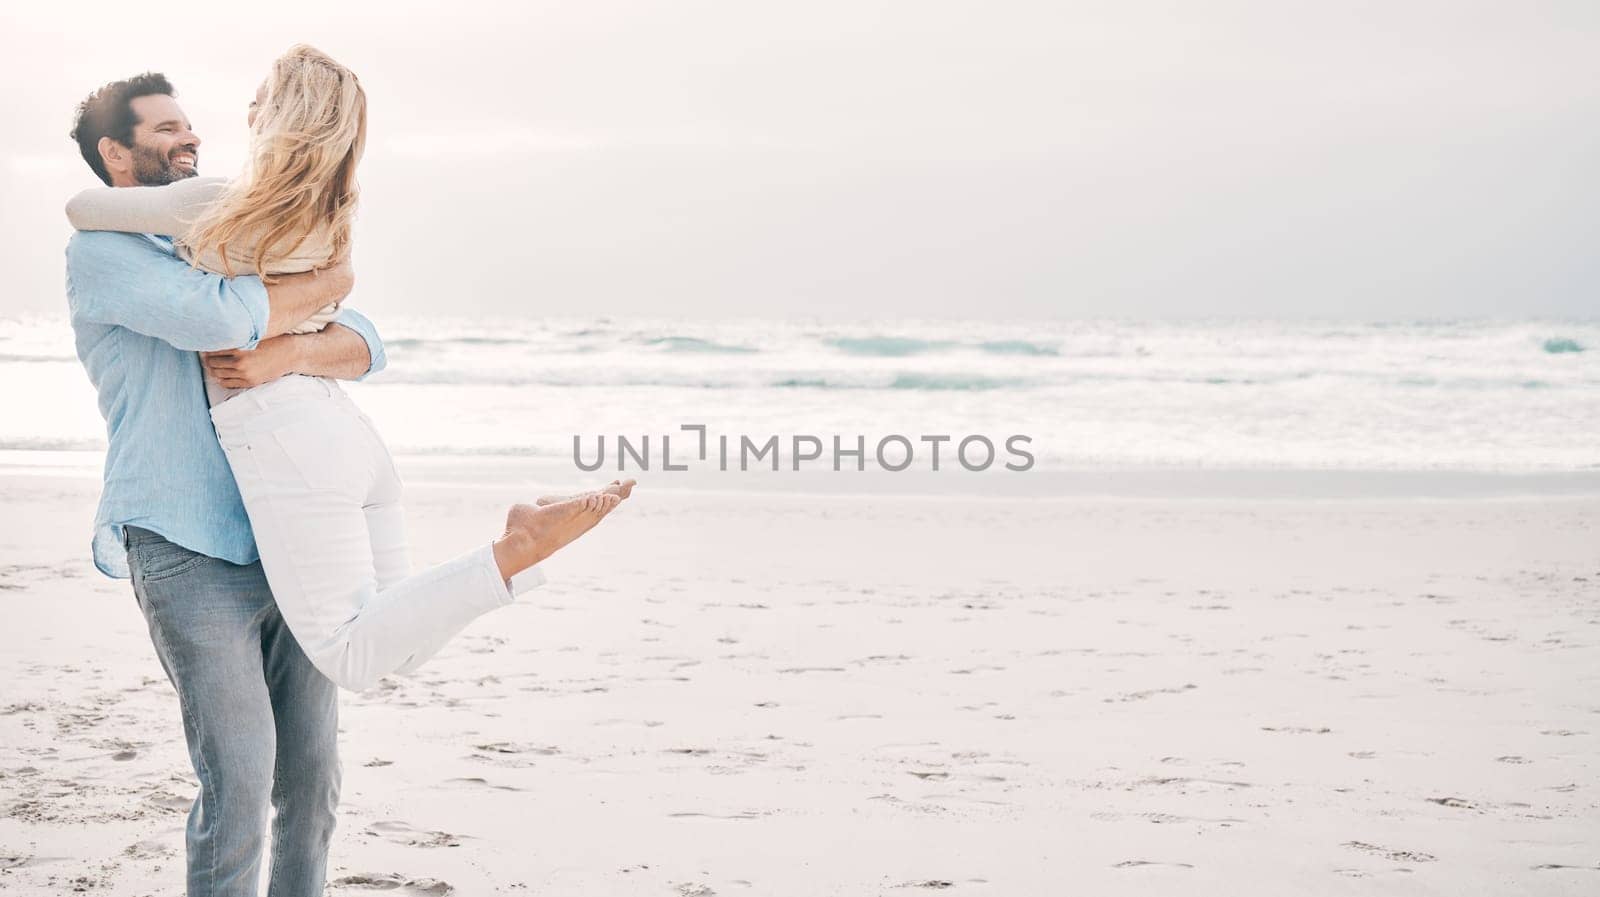 Beach, travel and man carry woman on holiday, vacation and romantic weekend for anniversary. Mockup space, marriage and happy mature couple spin in air for bonding, quality time and romance by ocean.